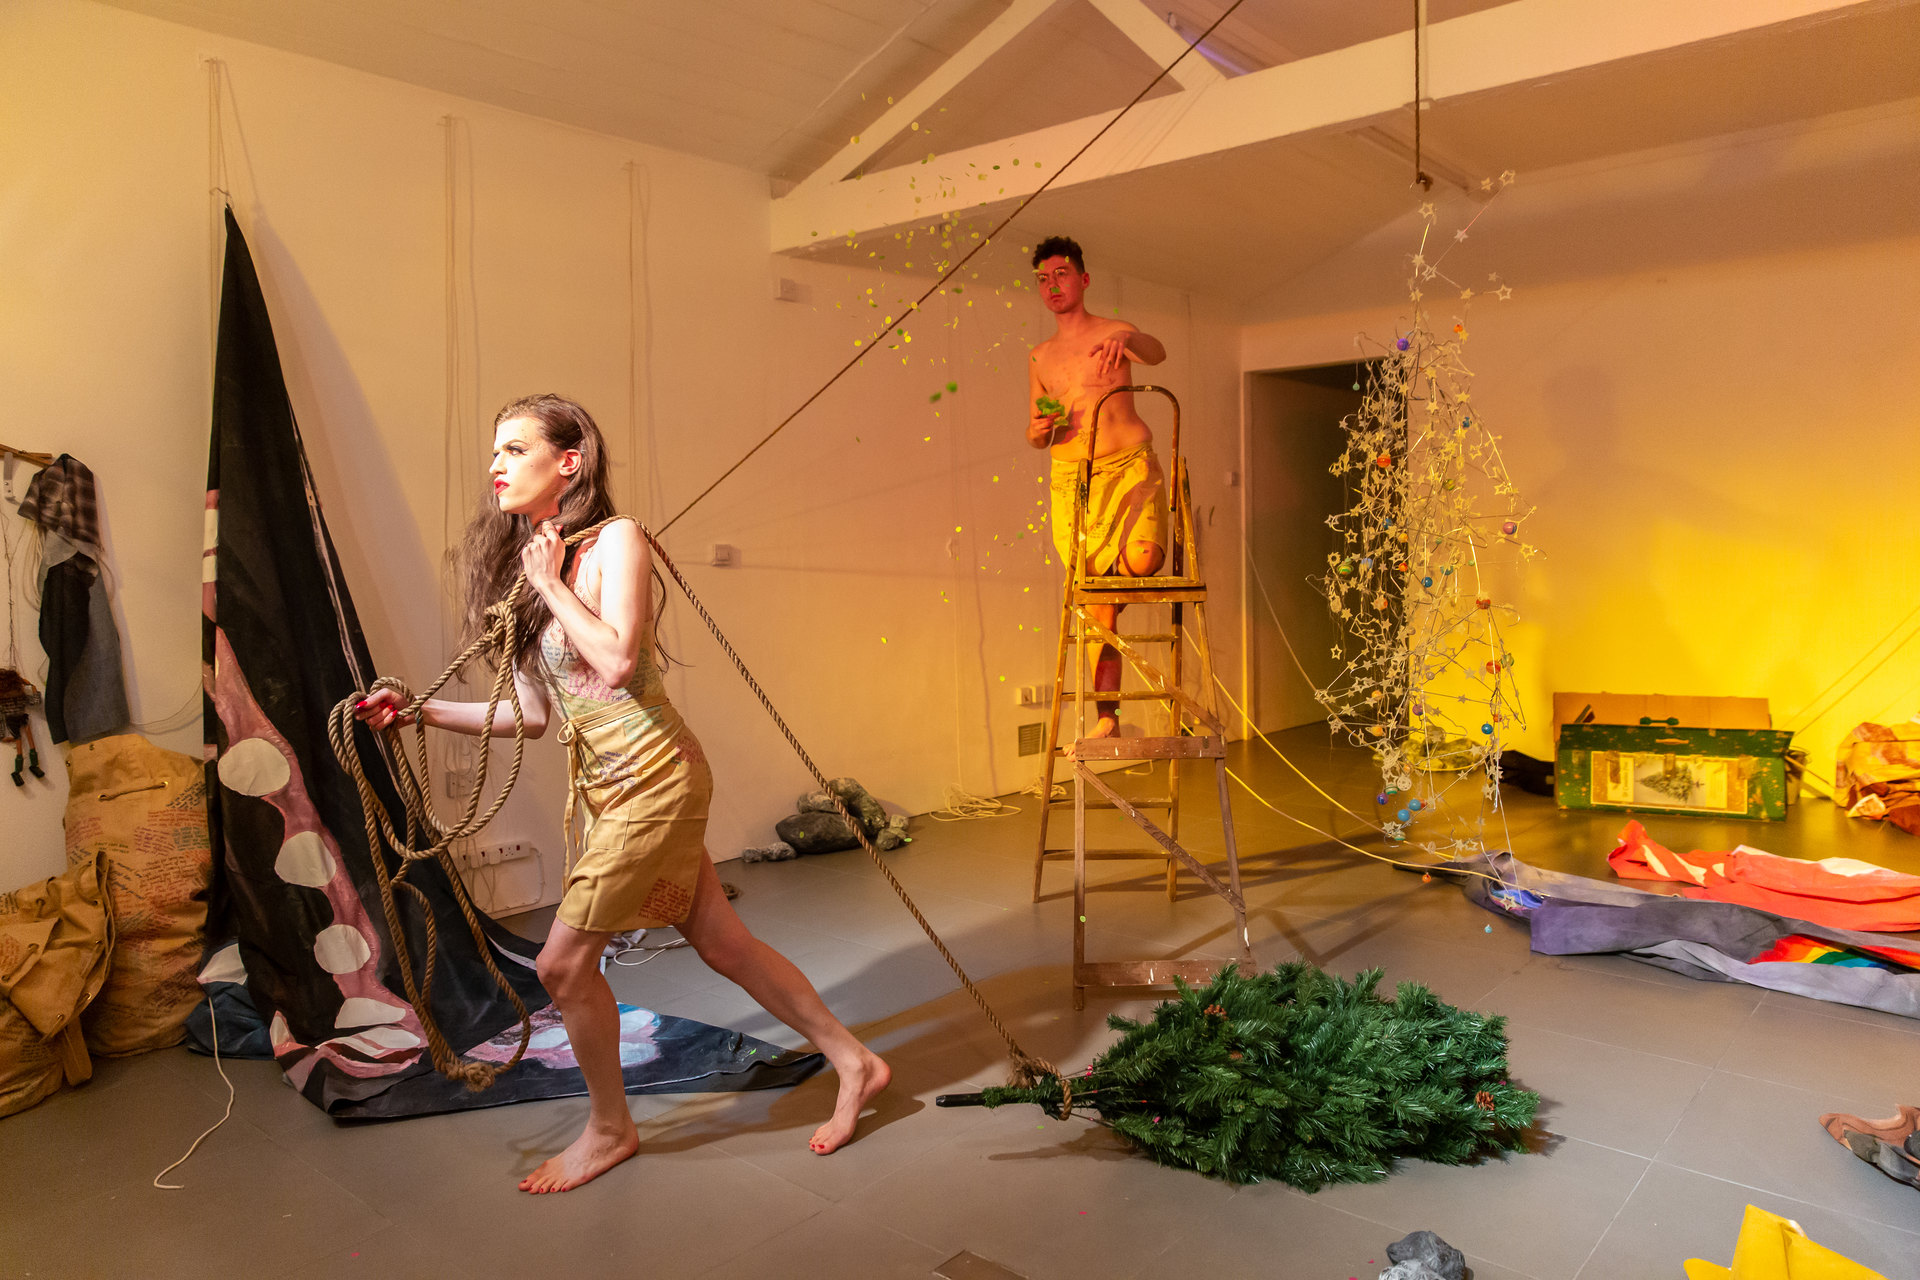 Alex Margo Arden and Caspar Heinemann, THE FARMYARD IS NOT A VIOLENT PLACE AND I LOOK EXACTLY LIKE JUDY GARLAND, 2019, Performance, Cell Project Space 